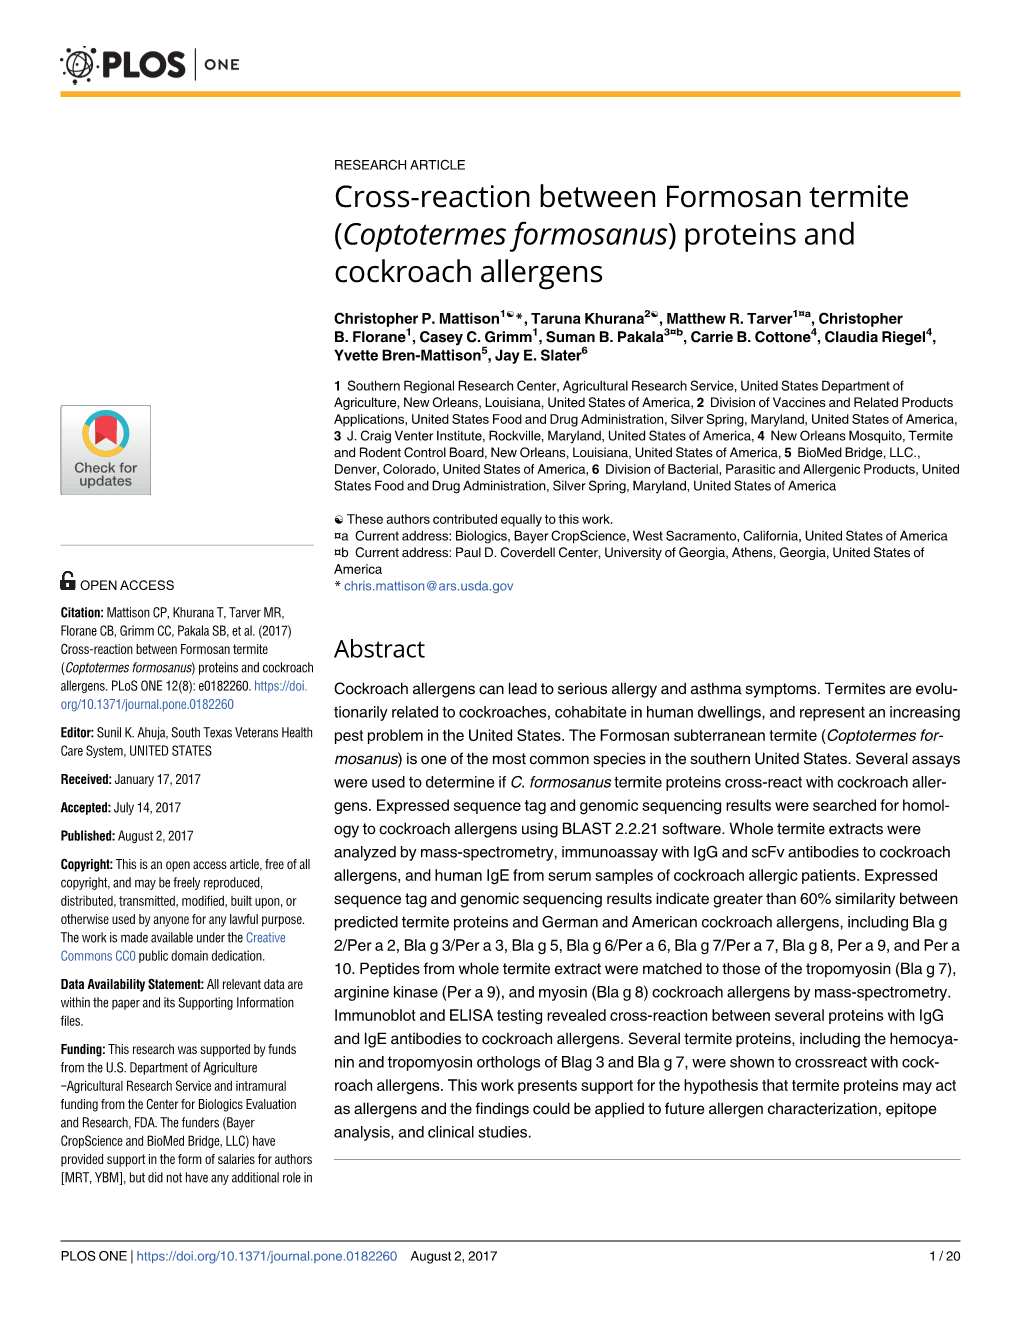 Cross-Reaction Between Formosan Termite (Coptotermes Formosanus) Proteins and Cockroach Allergens